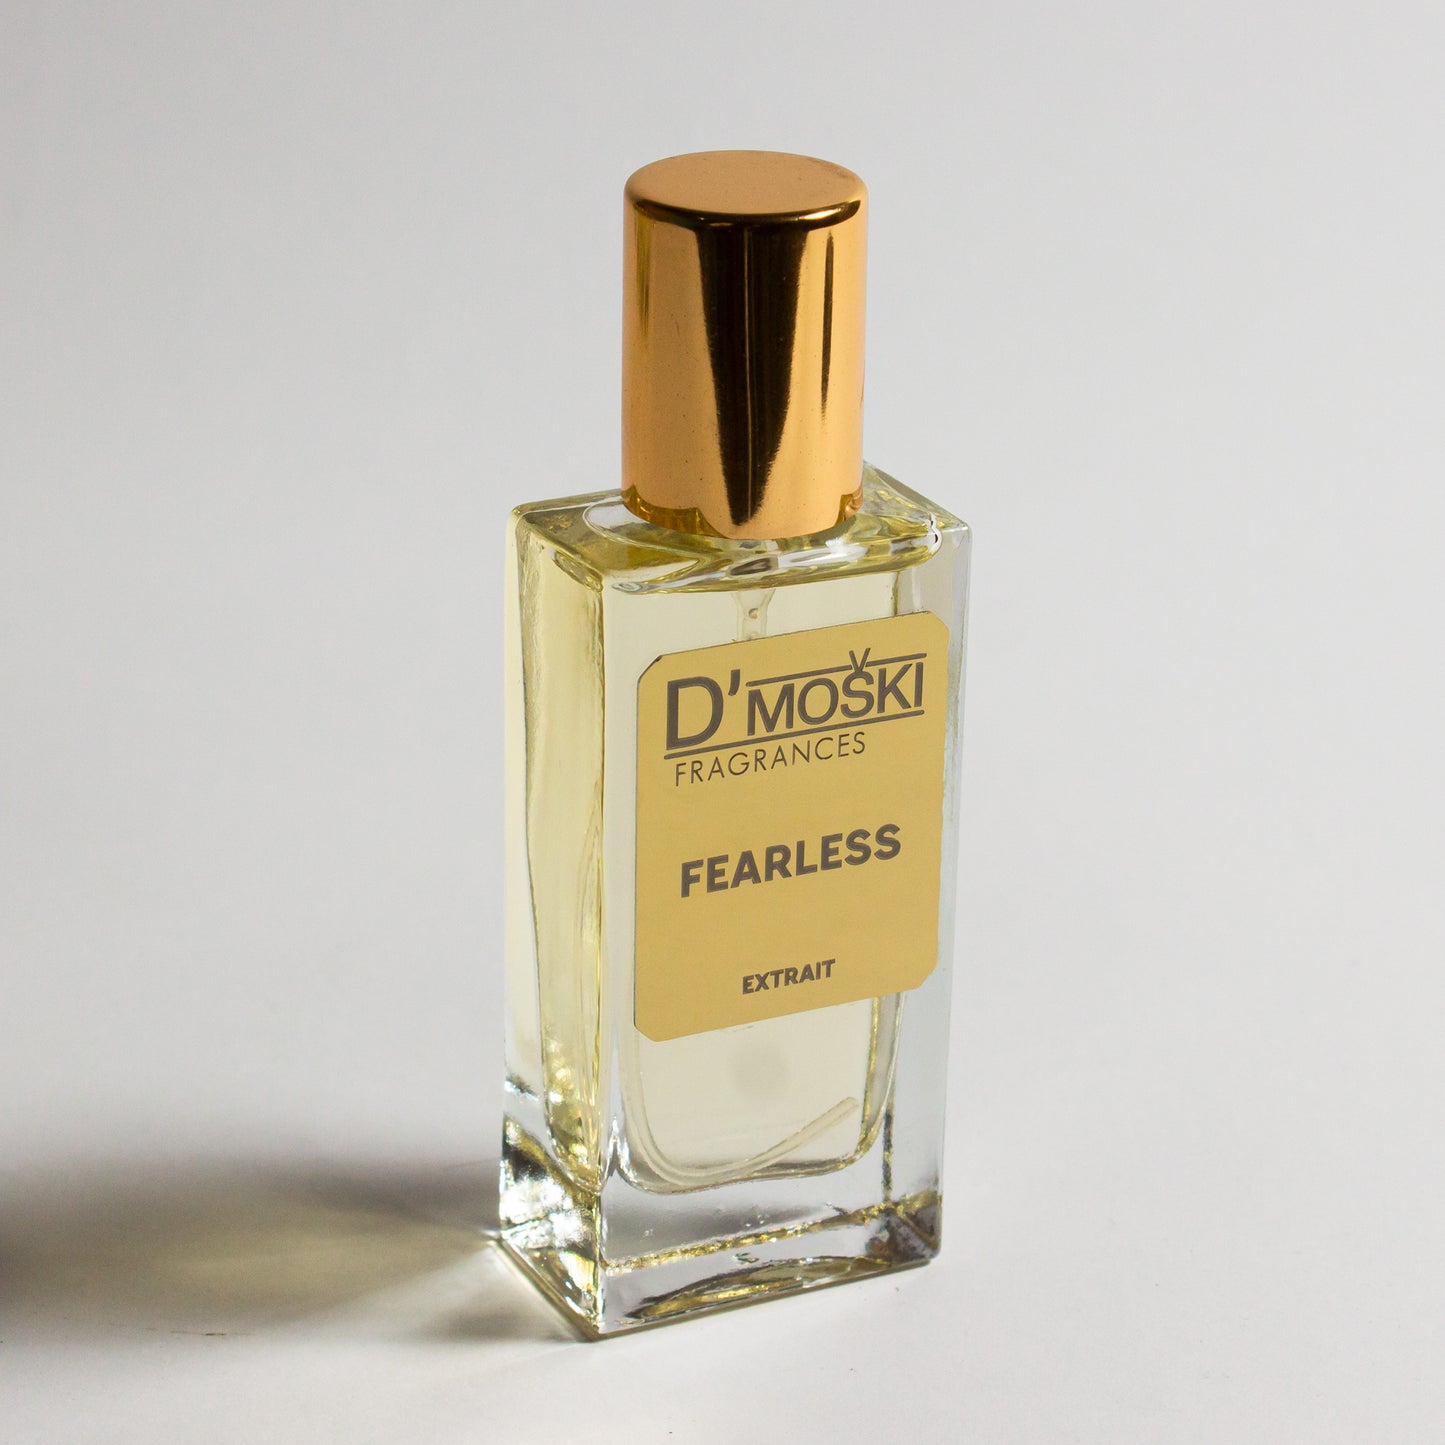 Fearless - Olfactive Direction: Sauvage Elixir by Dior